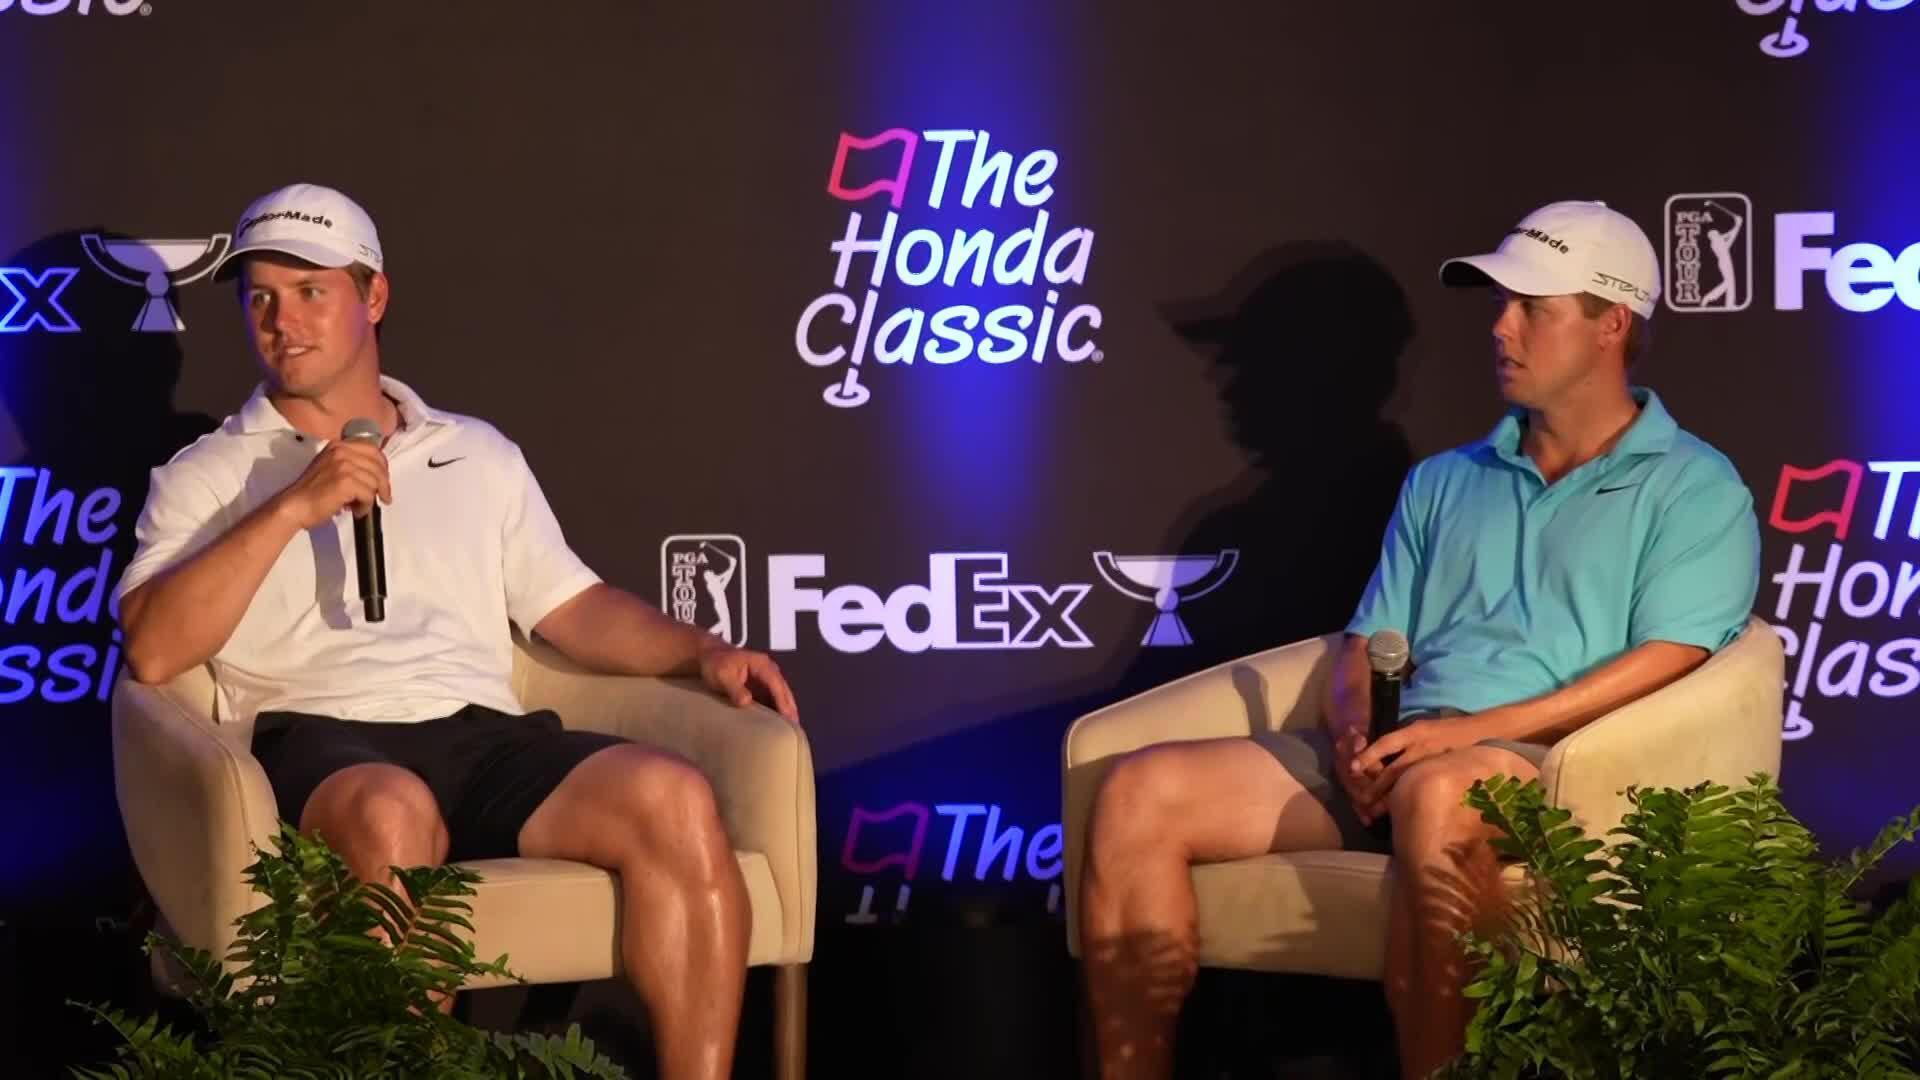 The Coody twins are both playing The Honda Classic and theyre ready to run 